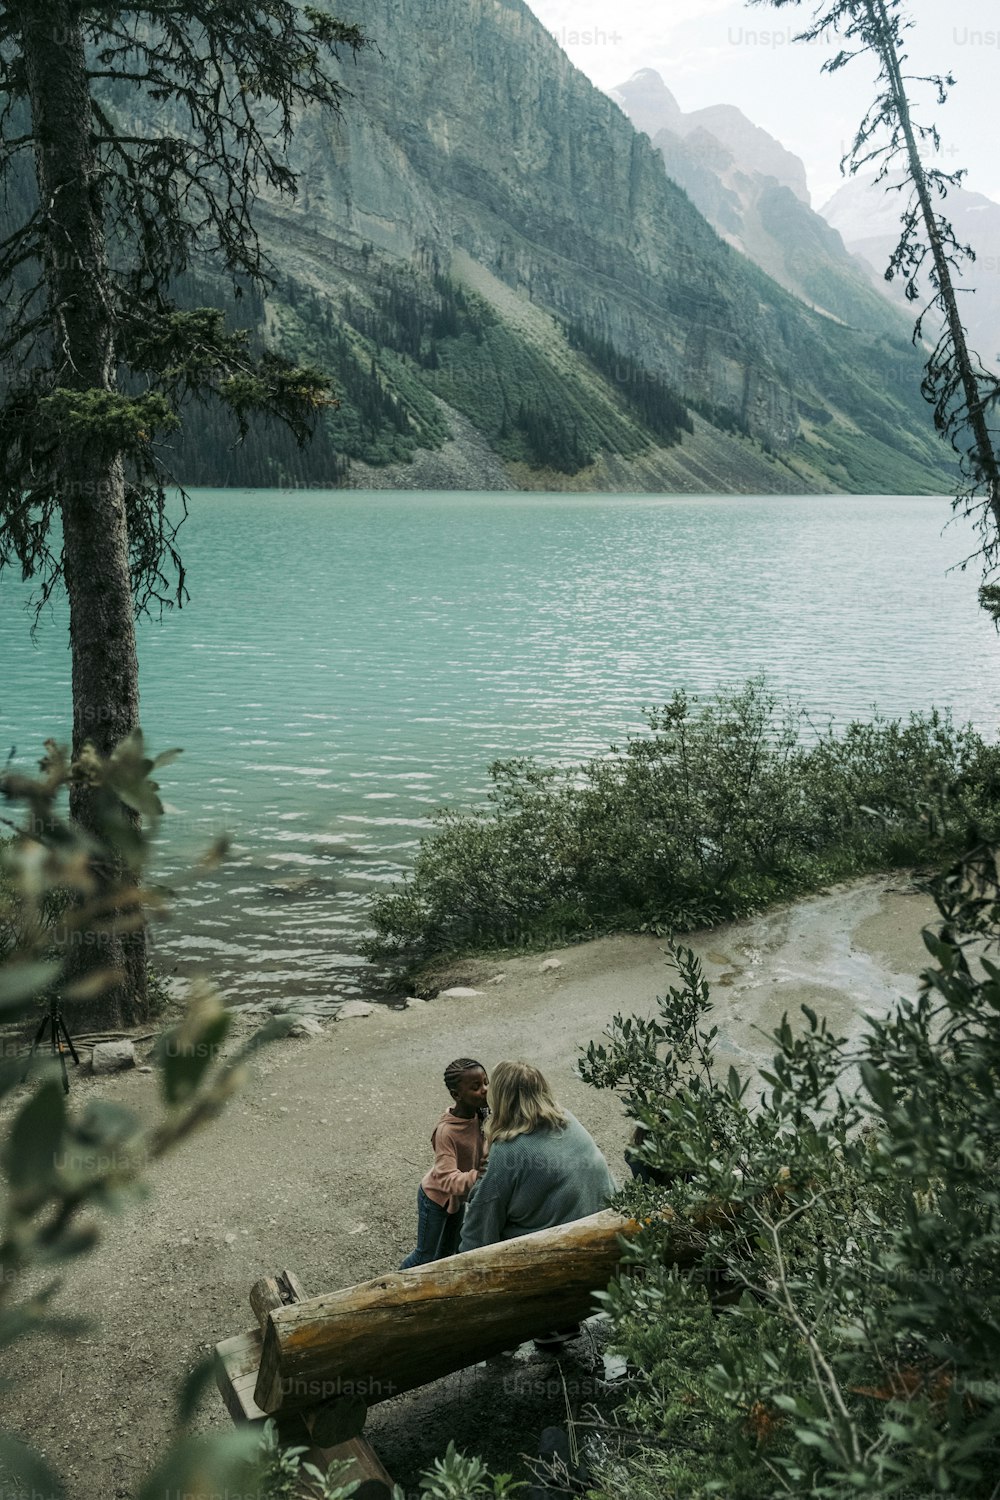 a man and woman sitting on a bench next to a lake